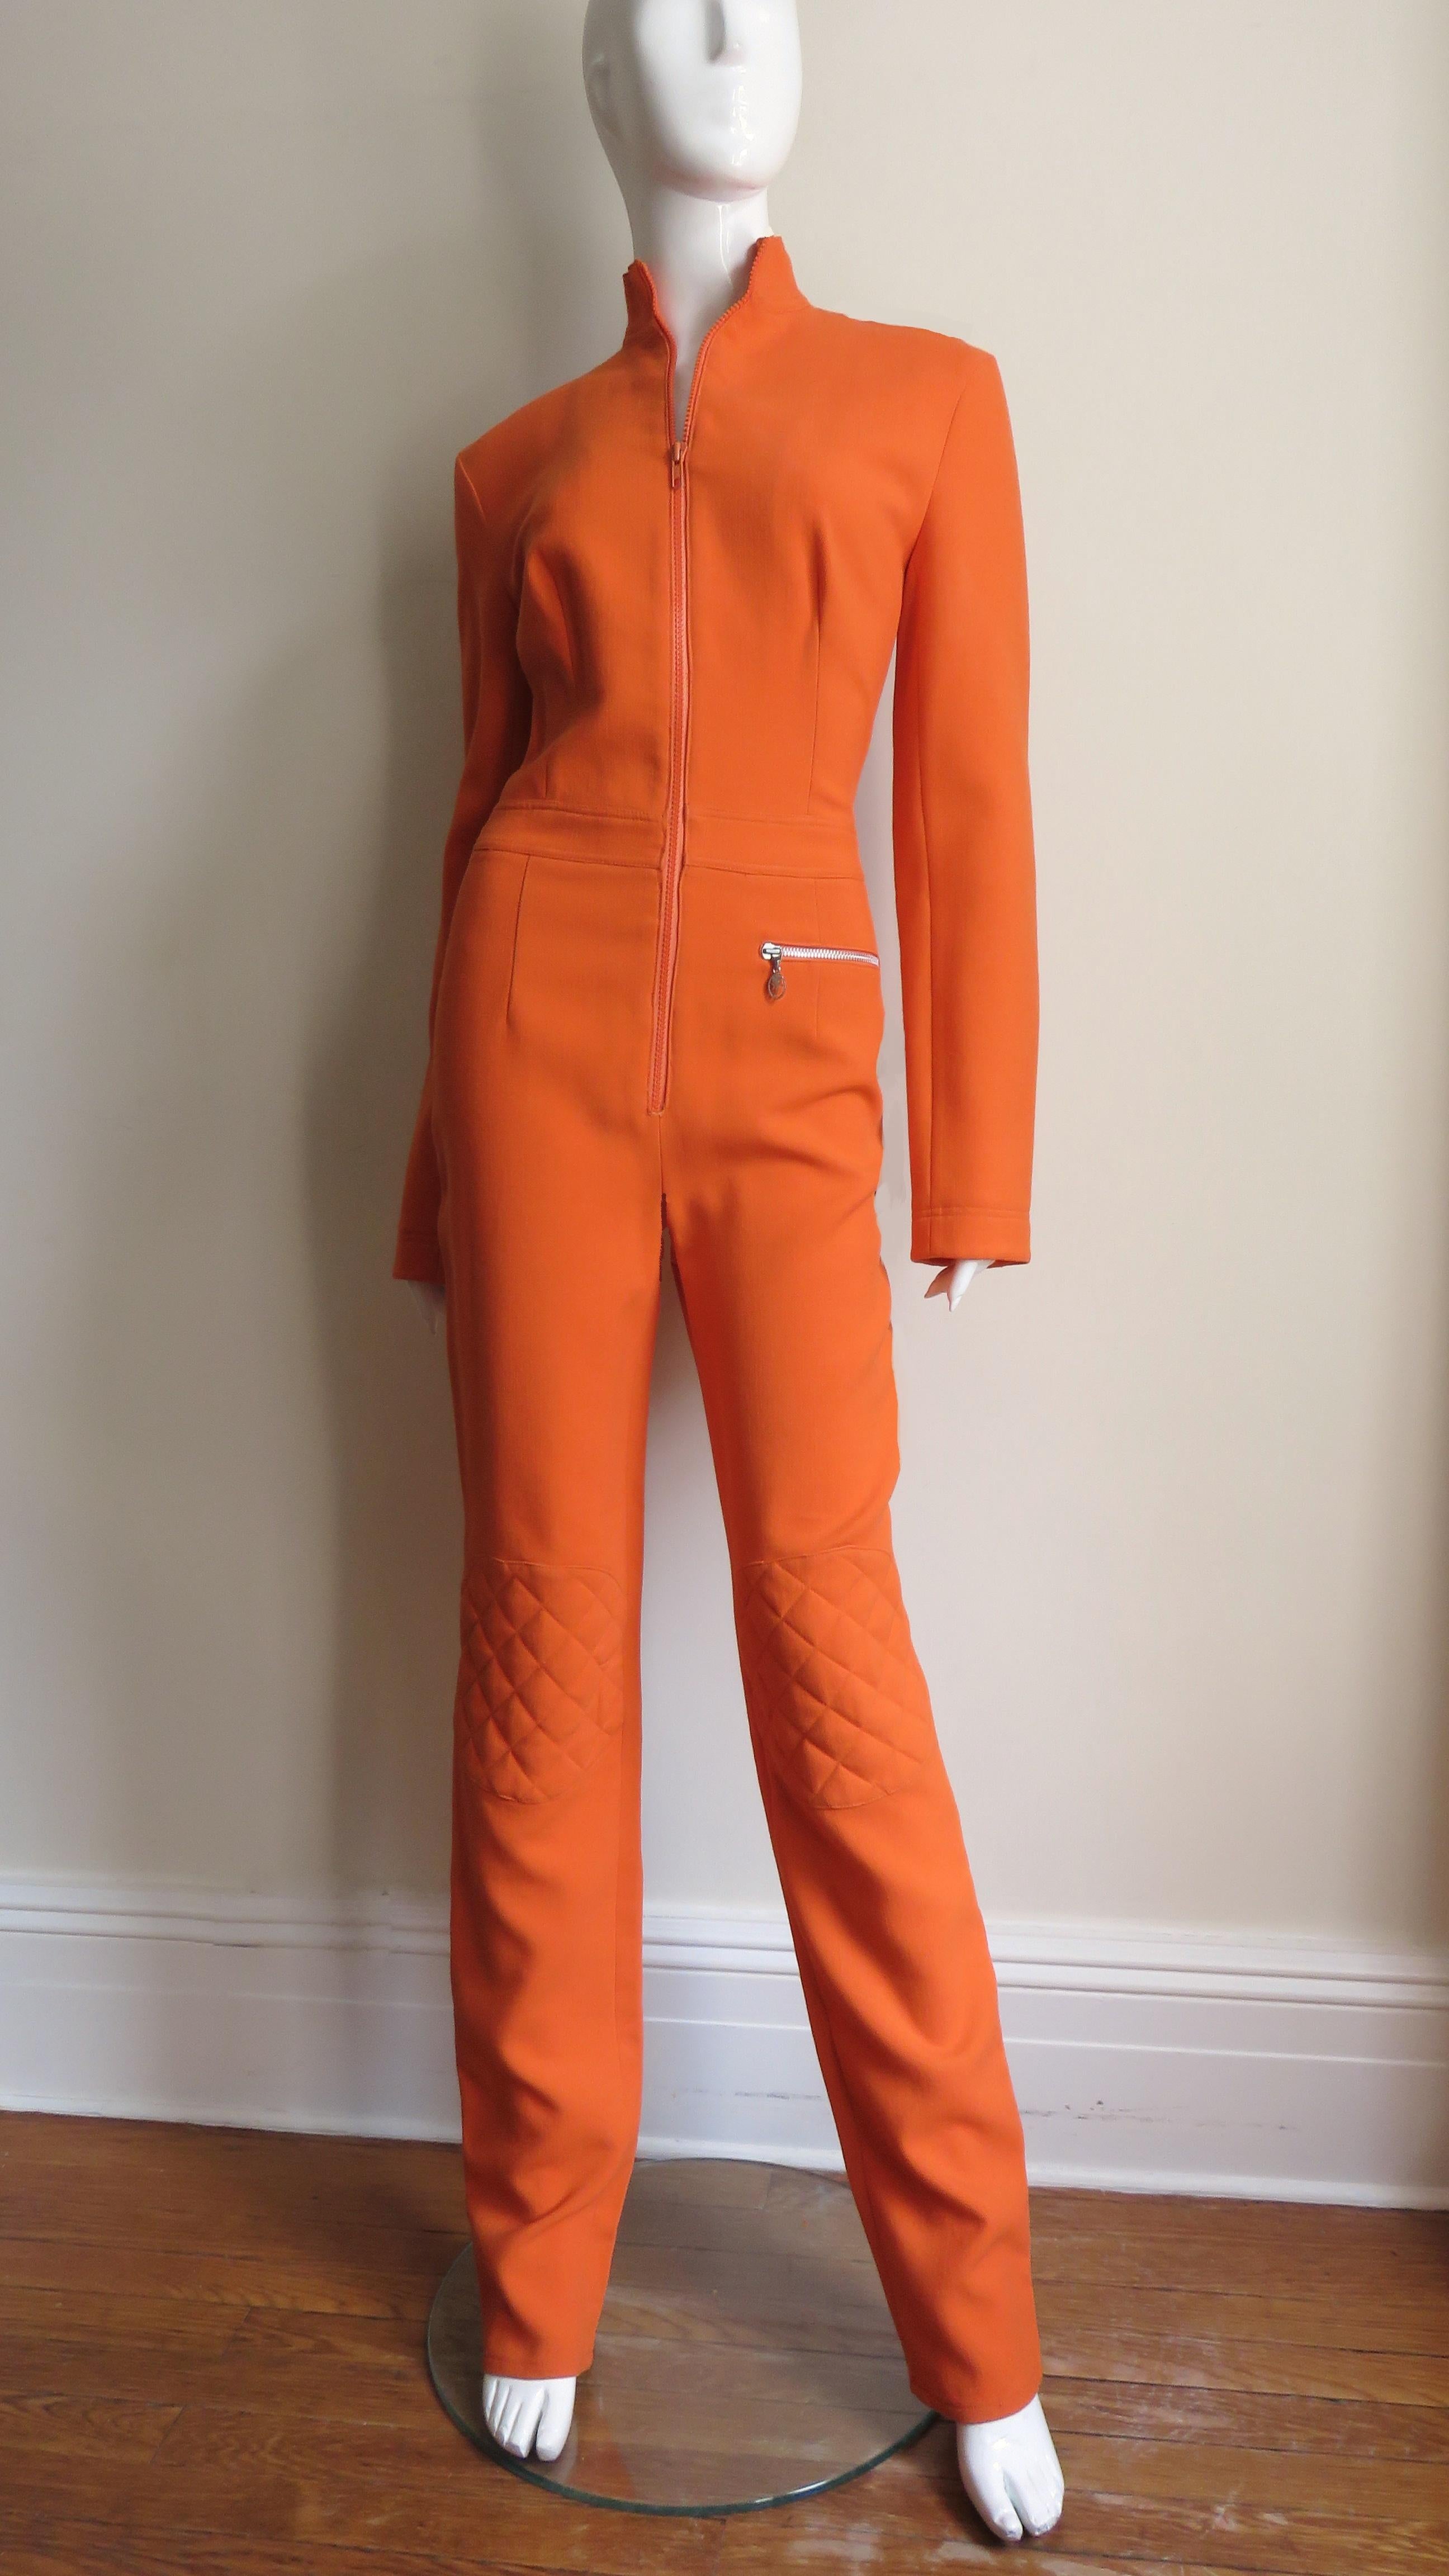 A fabulous orange wool jumpsuit from Jean Charles de Castelbajac.  It has a stand up collar, long sleeves with zippers at the wrists, a front hip zipper pocket and a large matching orange zipper up the front.  The elbows and knees of the straight